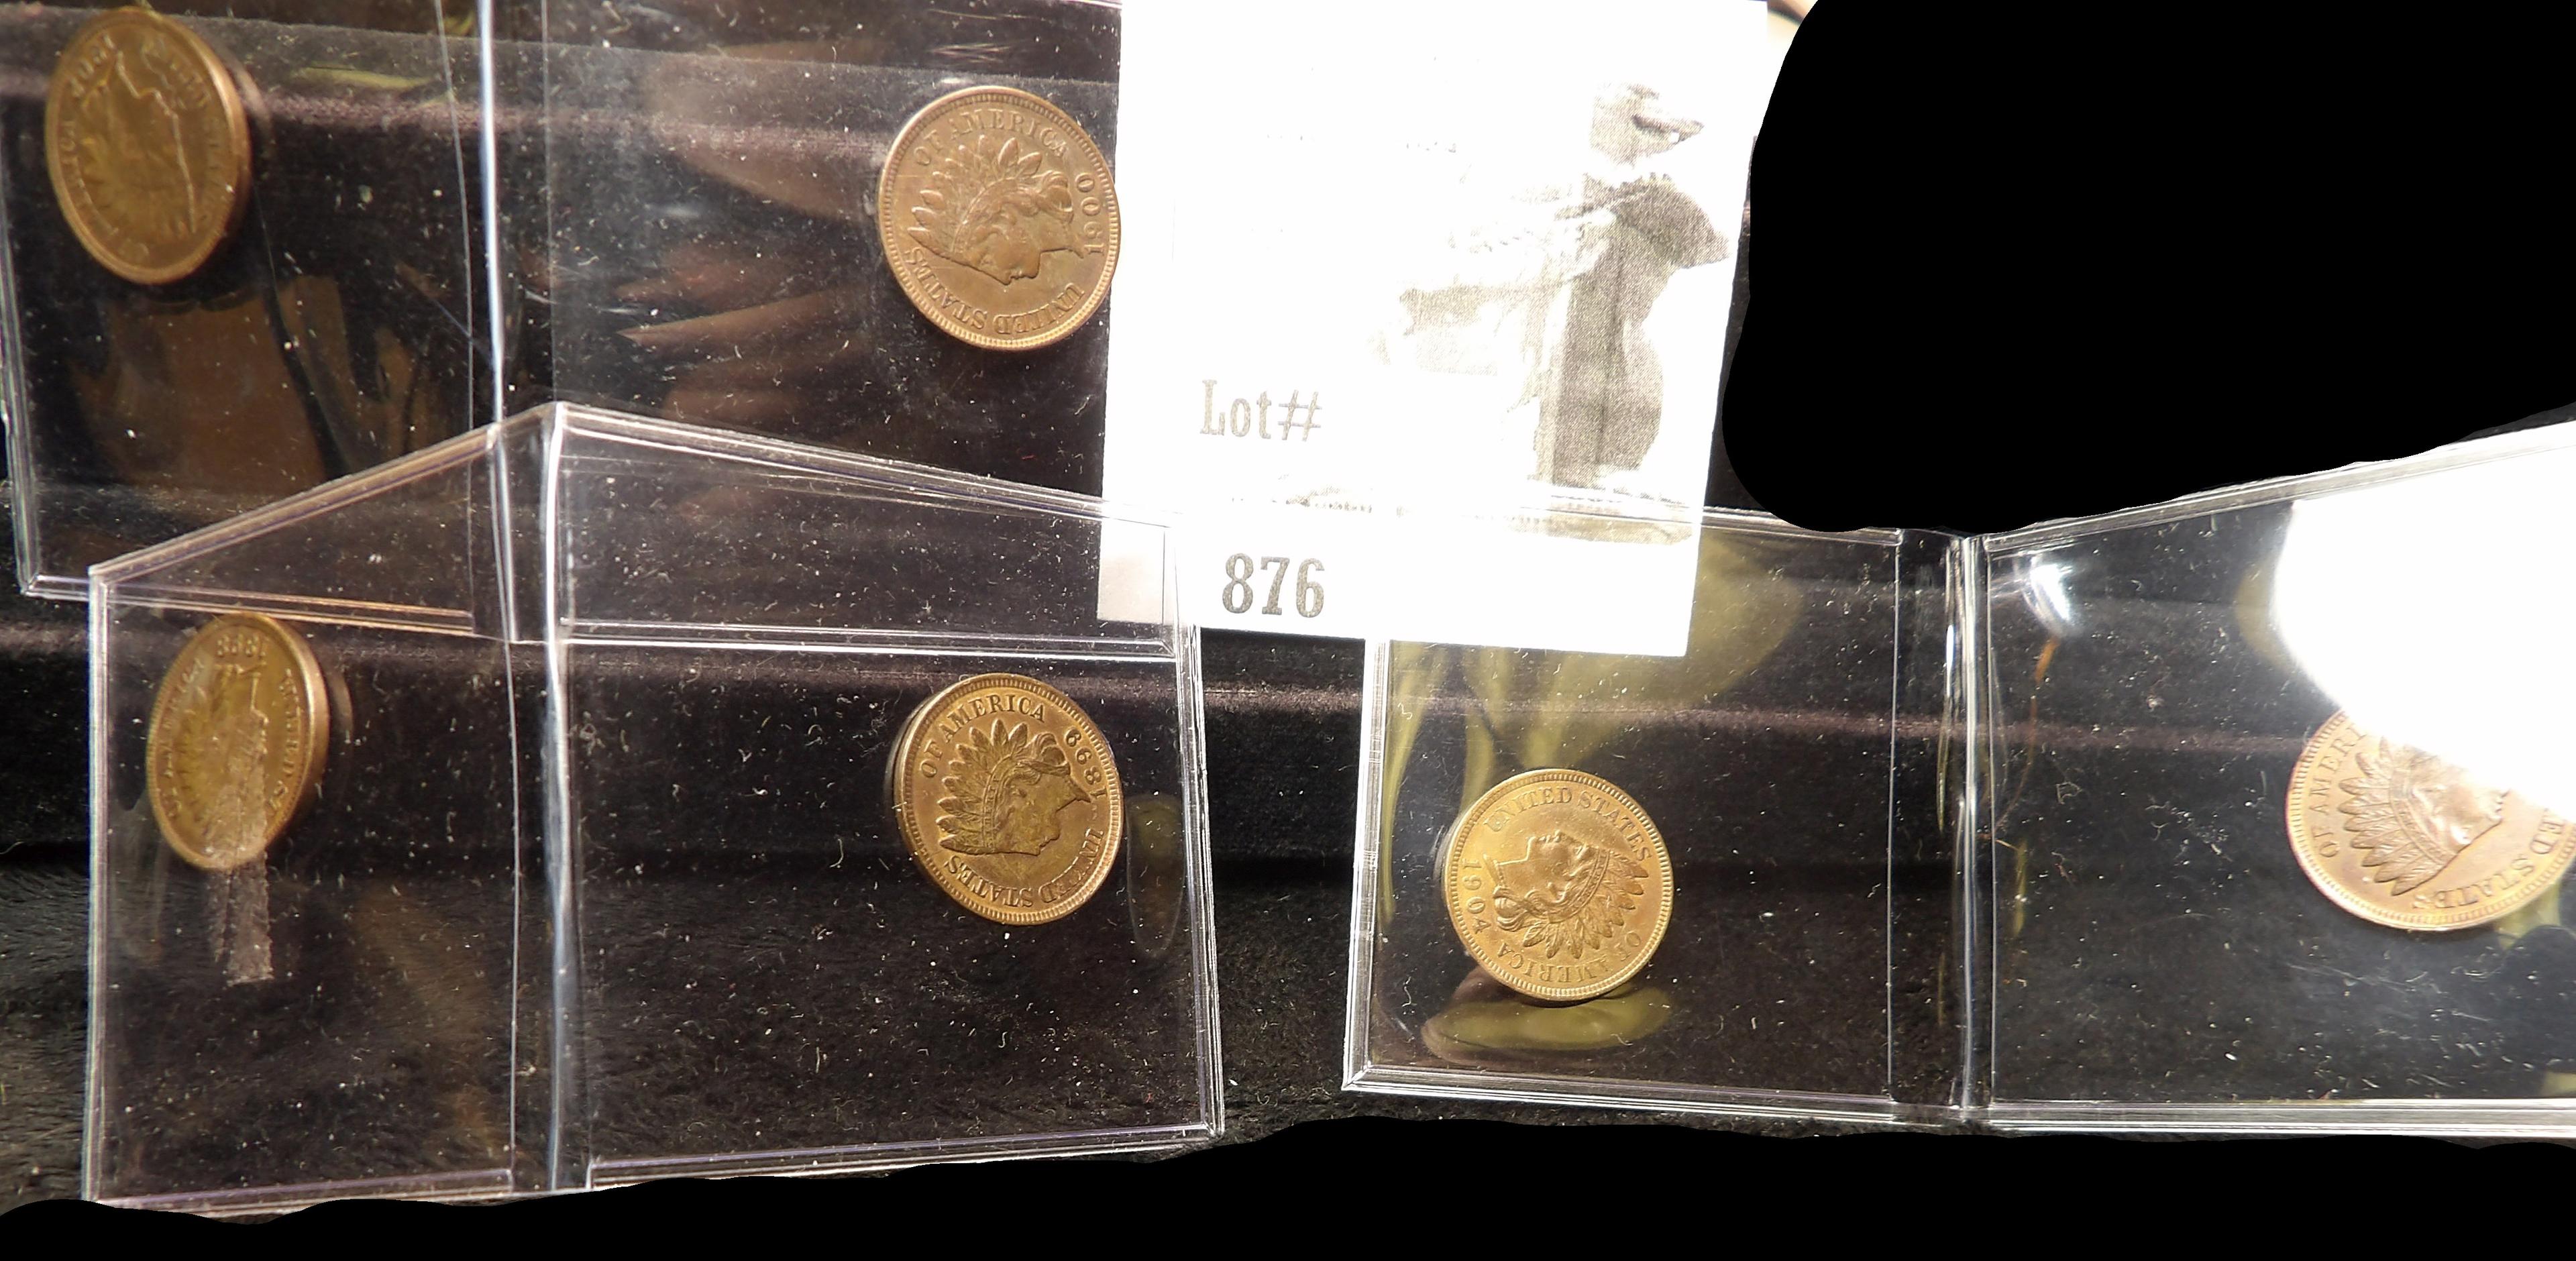 1898, 1899, 1900, 1902, 1903, & 1904 Indian Head Cents all EF-AU, many with original mint luster.